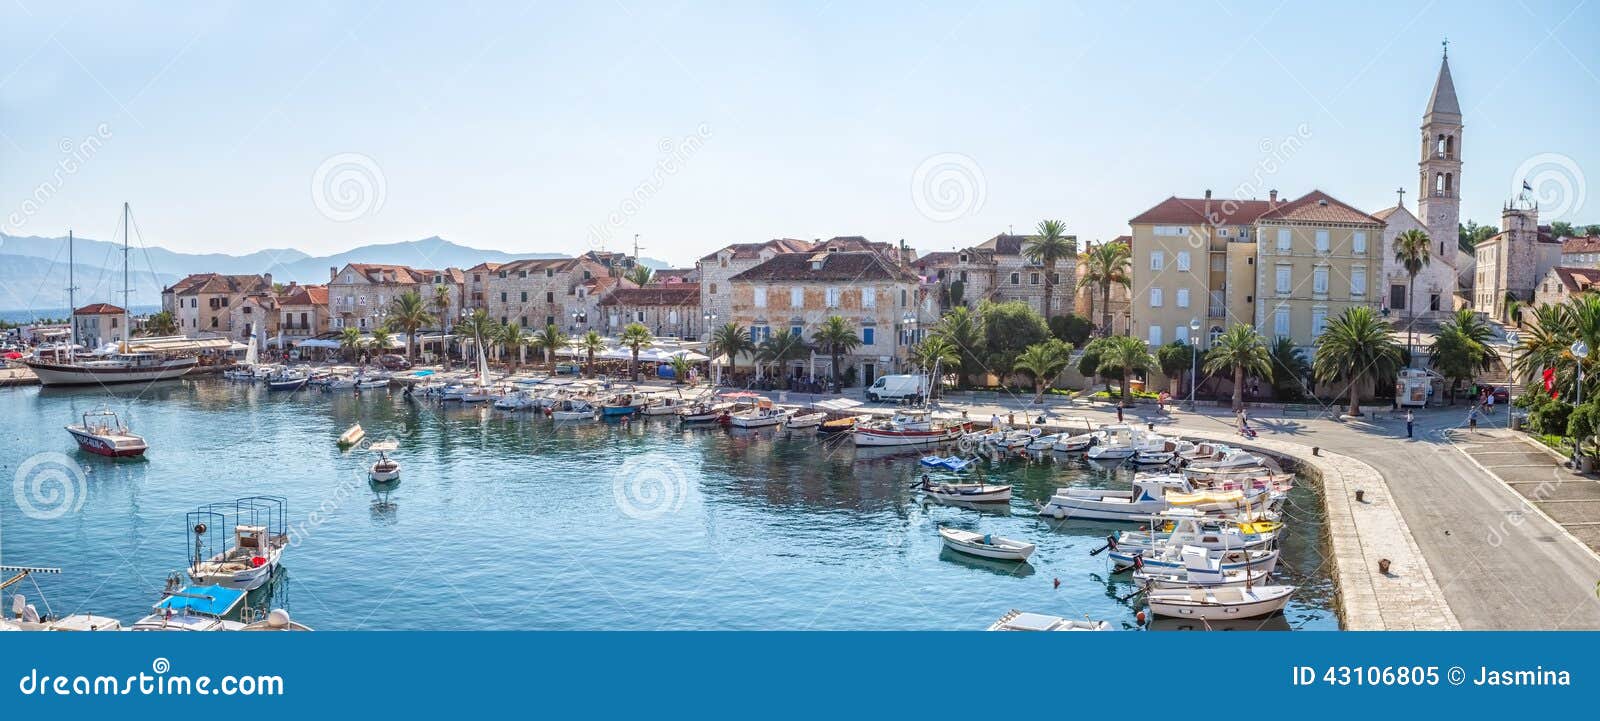 SUPETAR, CROATIA - JULY 24, 2014: Small port with fishing boats in the 